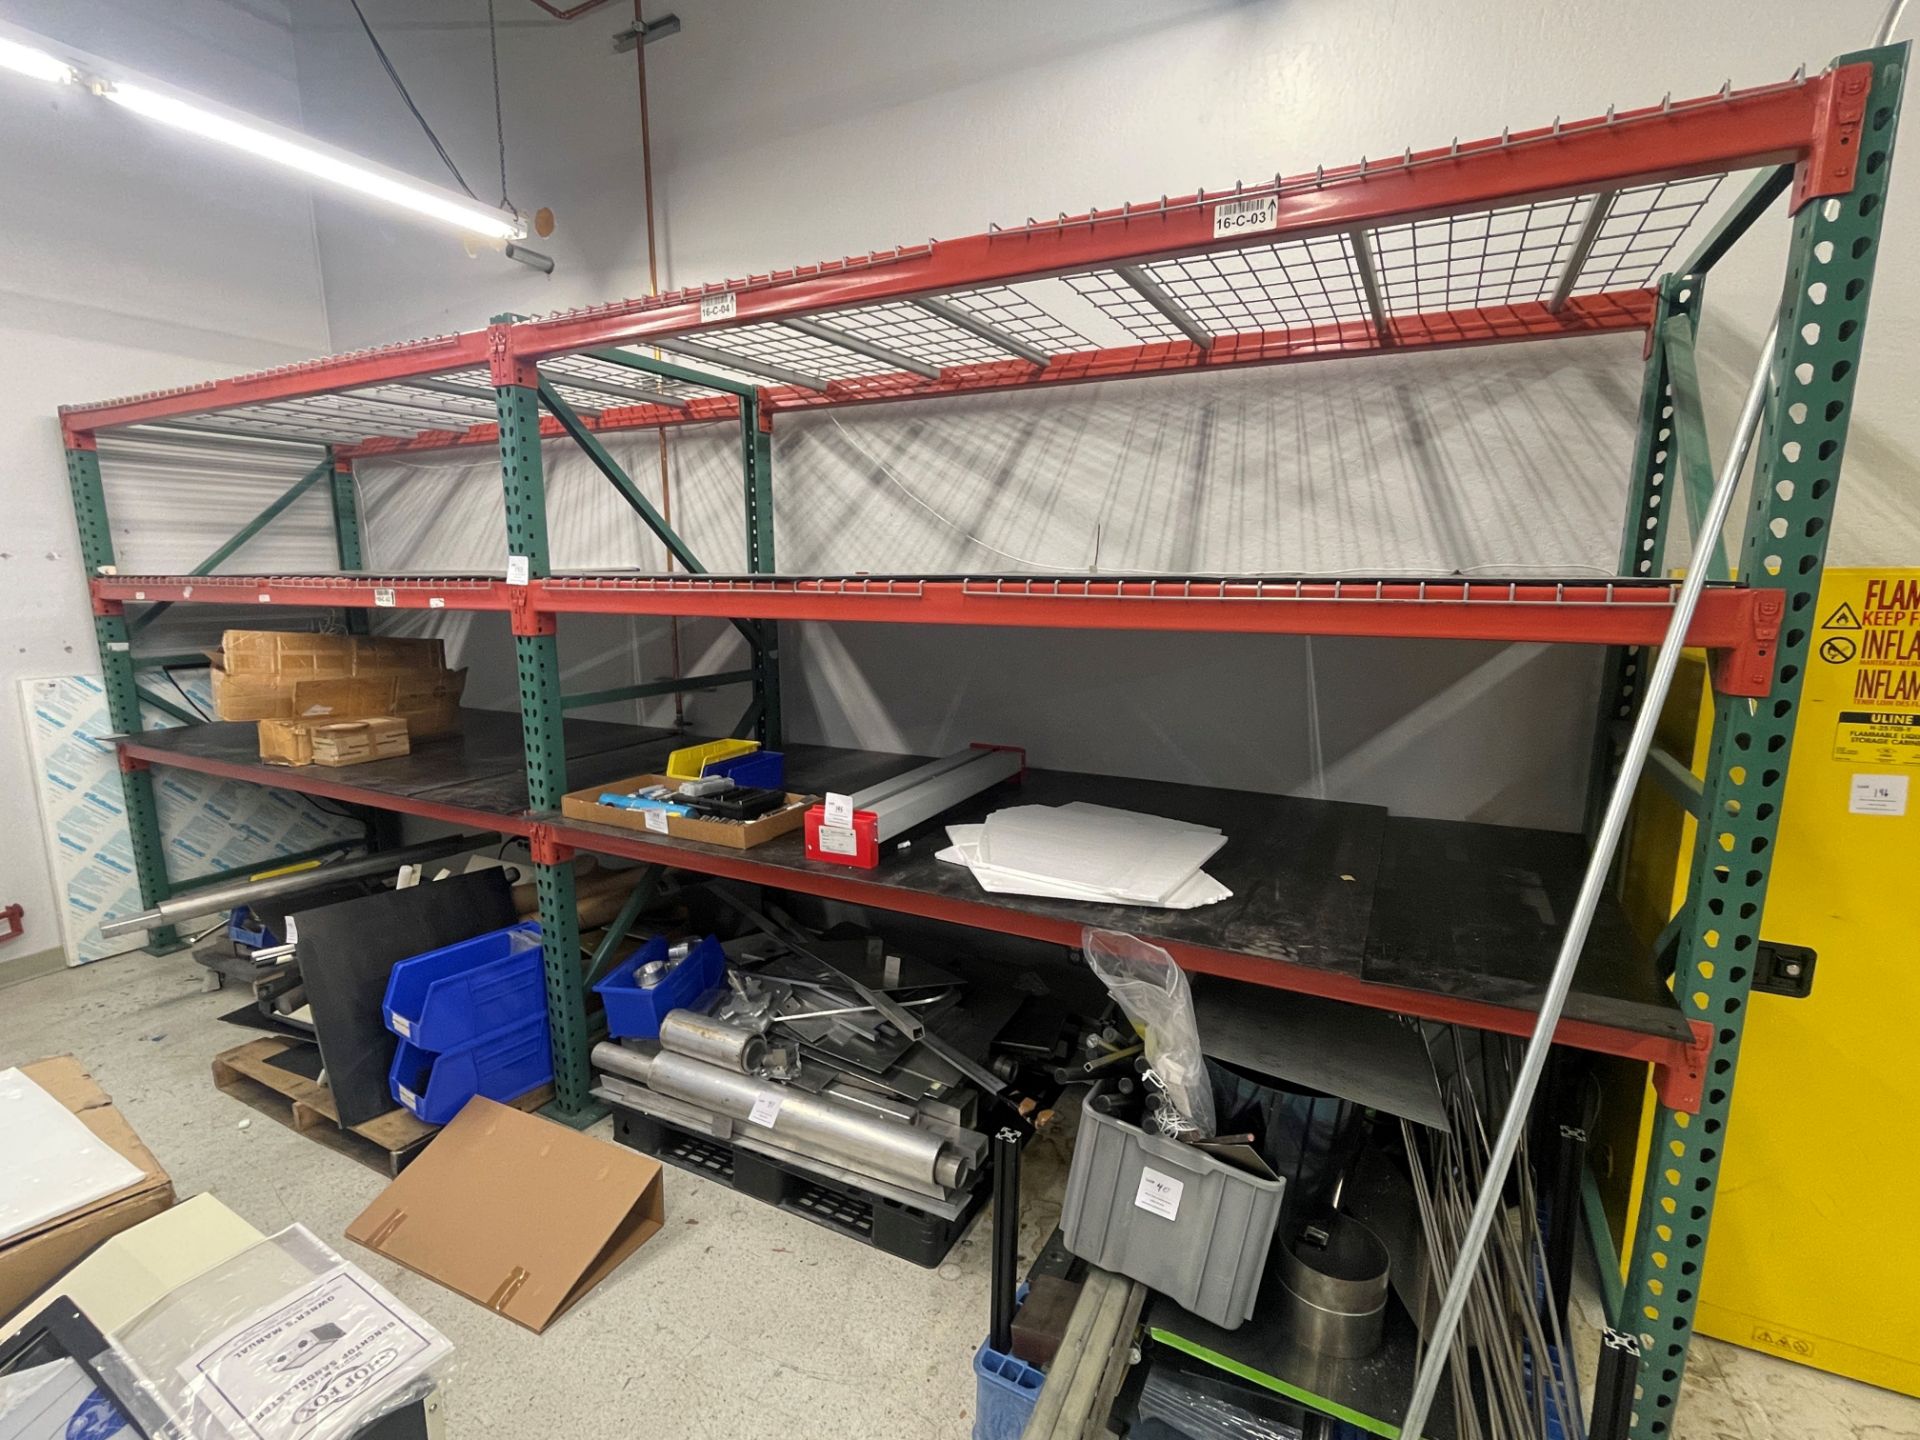 Industrial Pallet Racking, red and green, four shelves 108" wide x 46" deep x 91" high